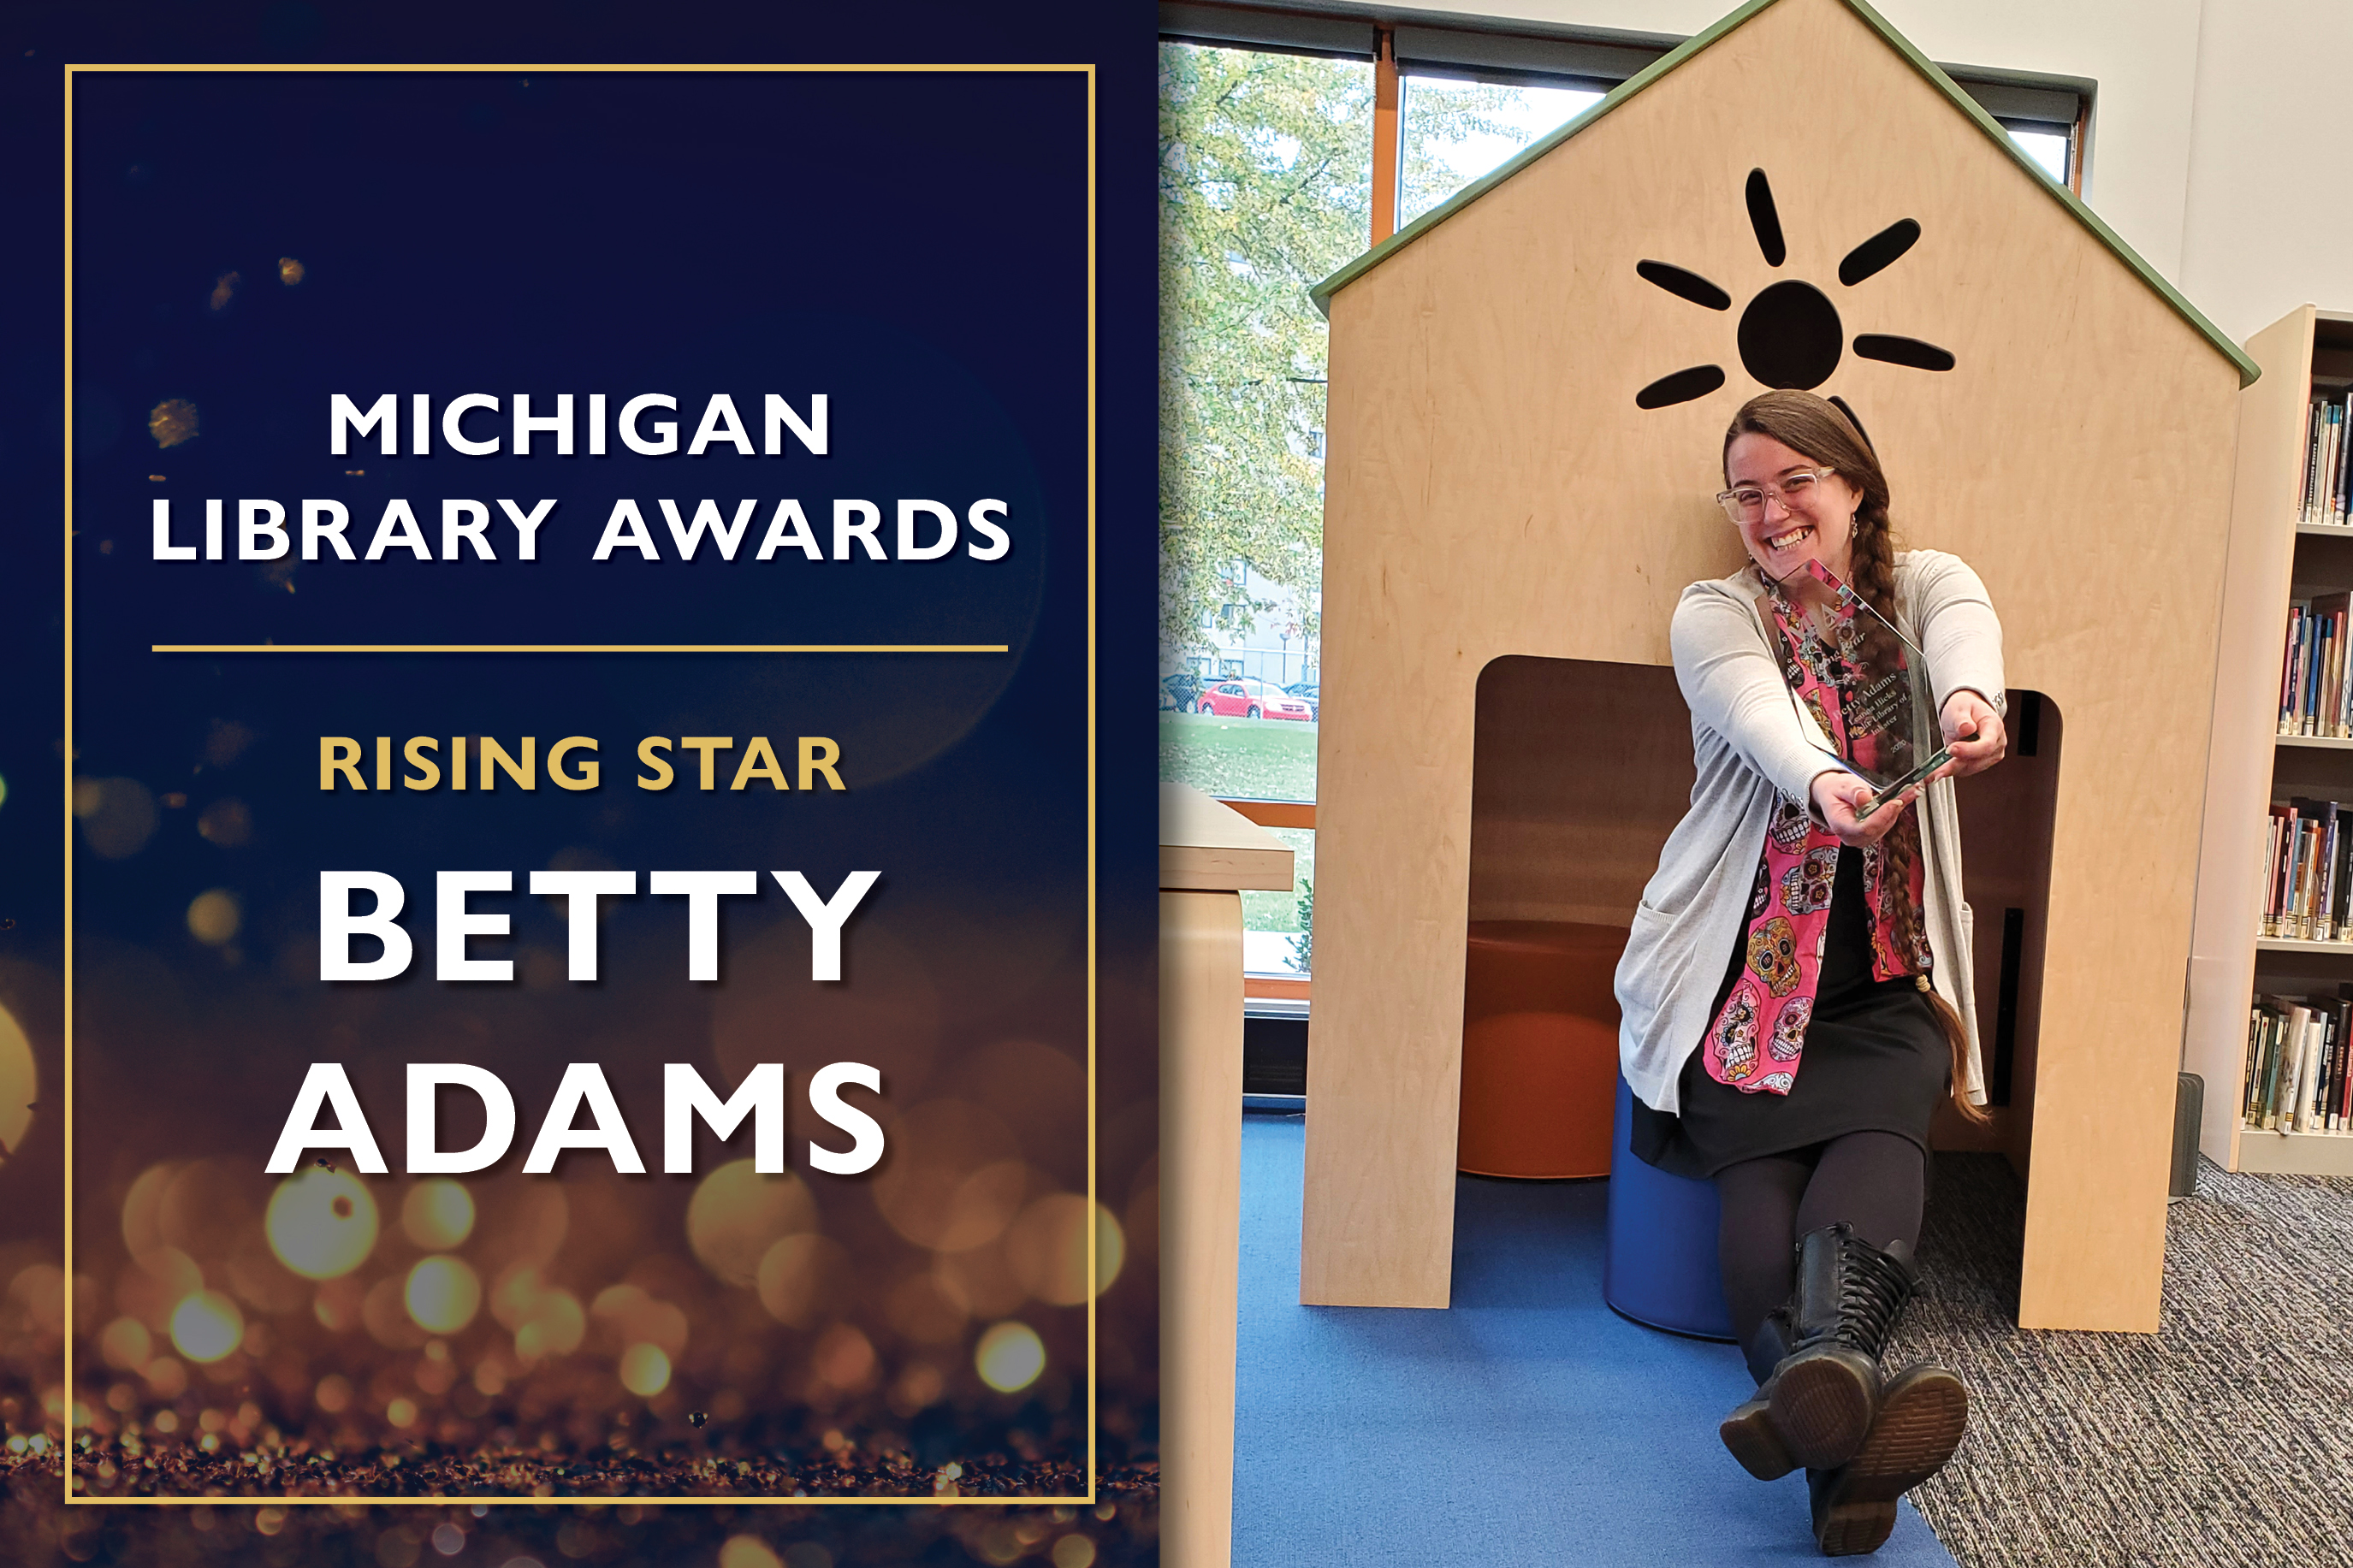 Rising Star  Betty Adams, Library Director at the Leanna Hicks Public Library of Inkster